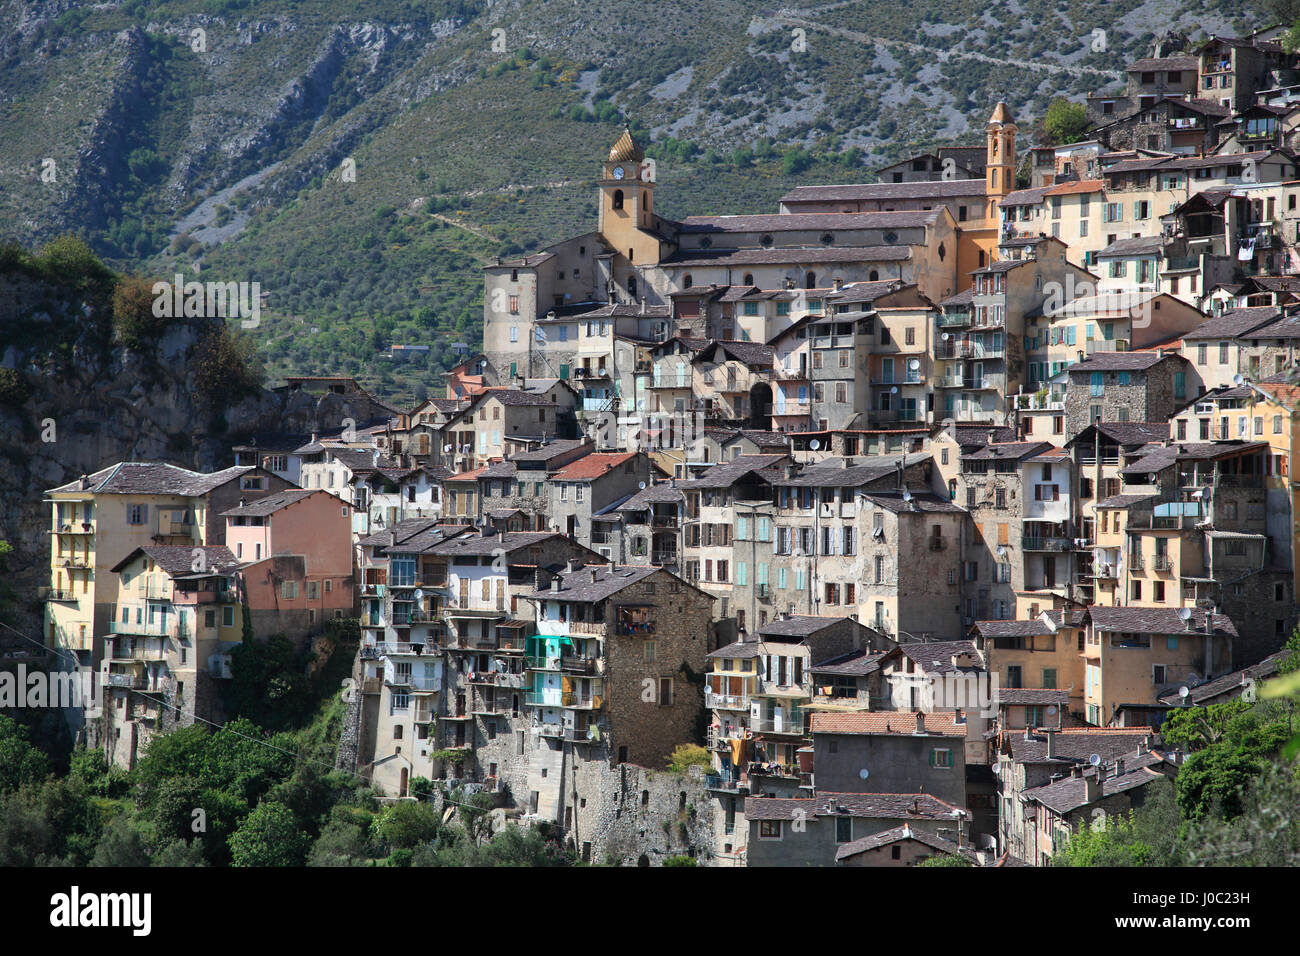 Saorge, perched Medieval village, Roya Valley, Alpes-Maritimes, Cote d'Azur, French Riviera, Provence, France Stock Photo